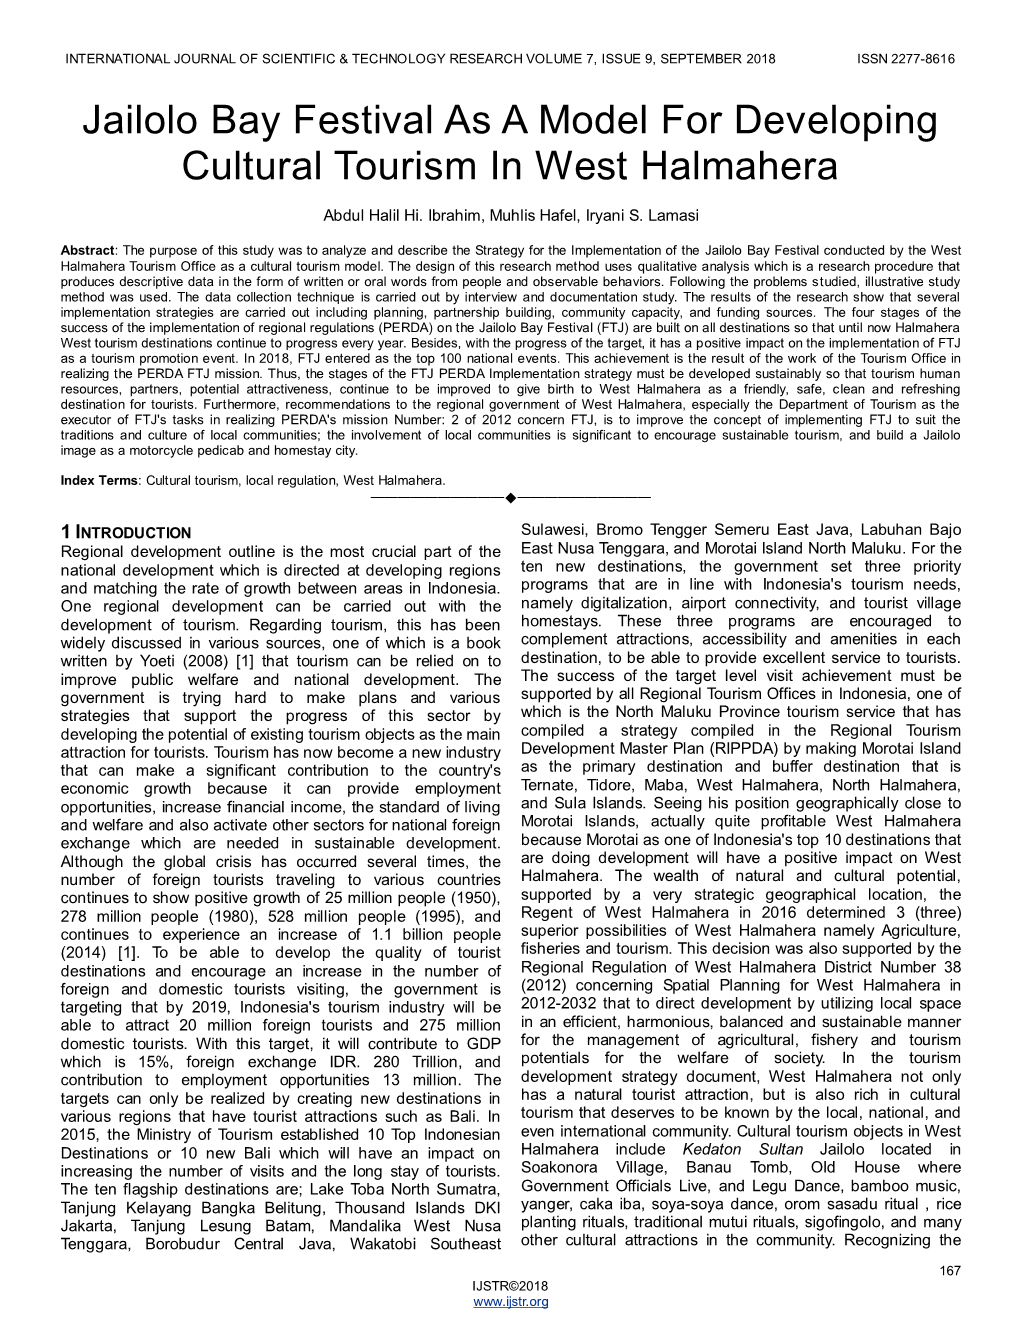 Jailolo Bay Festival As a Model for Developing Cultural Tourism in West Halmahera